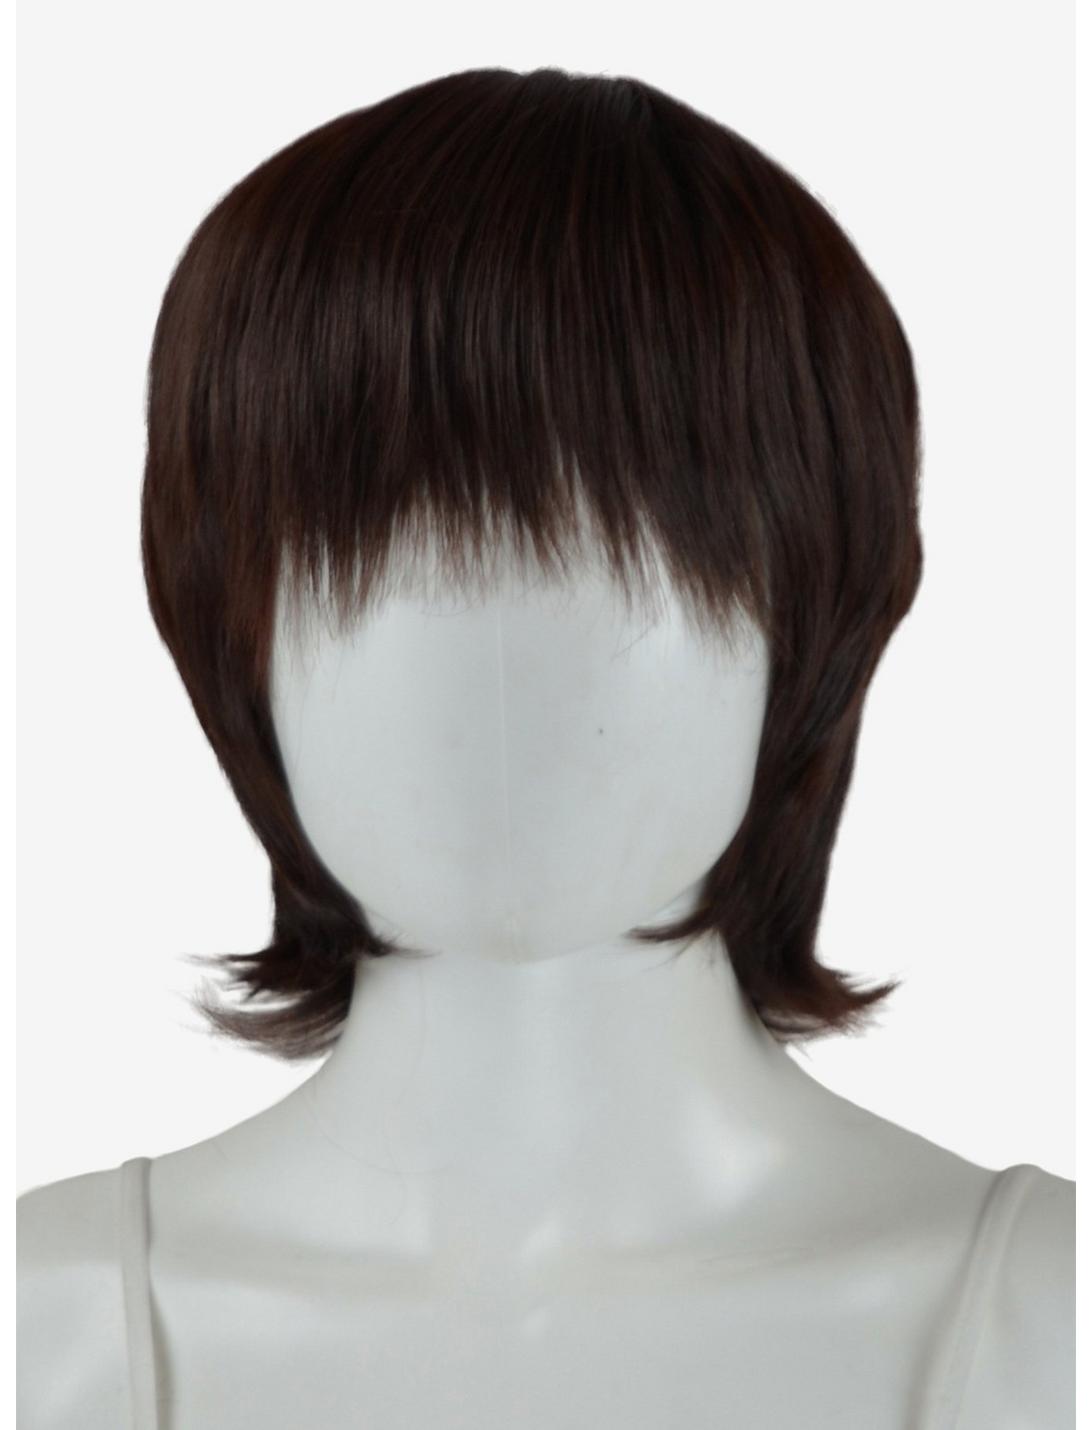 Epic Cosplay Aether Dark Brown Layered Short Wig, , hi-res